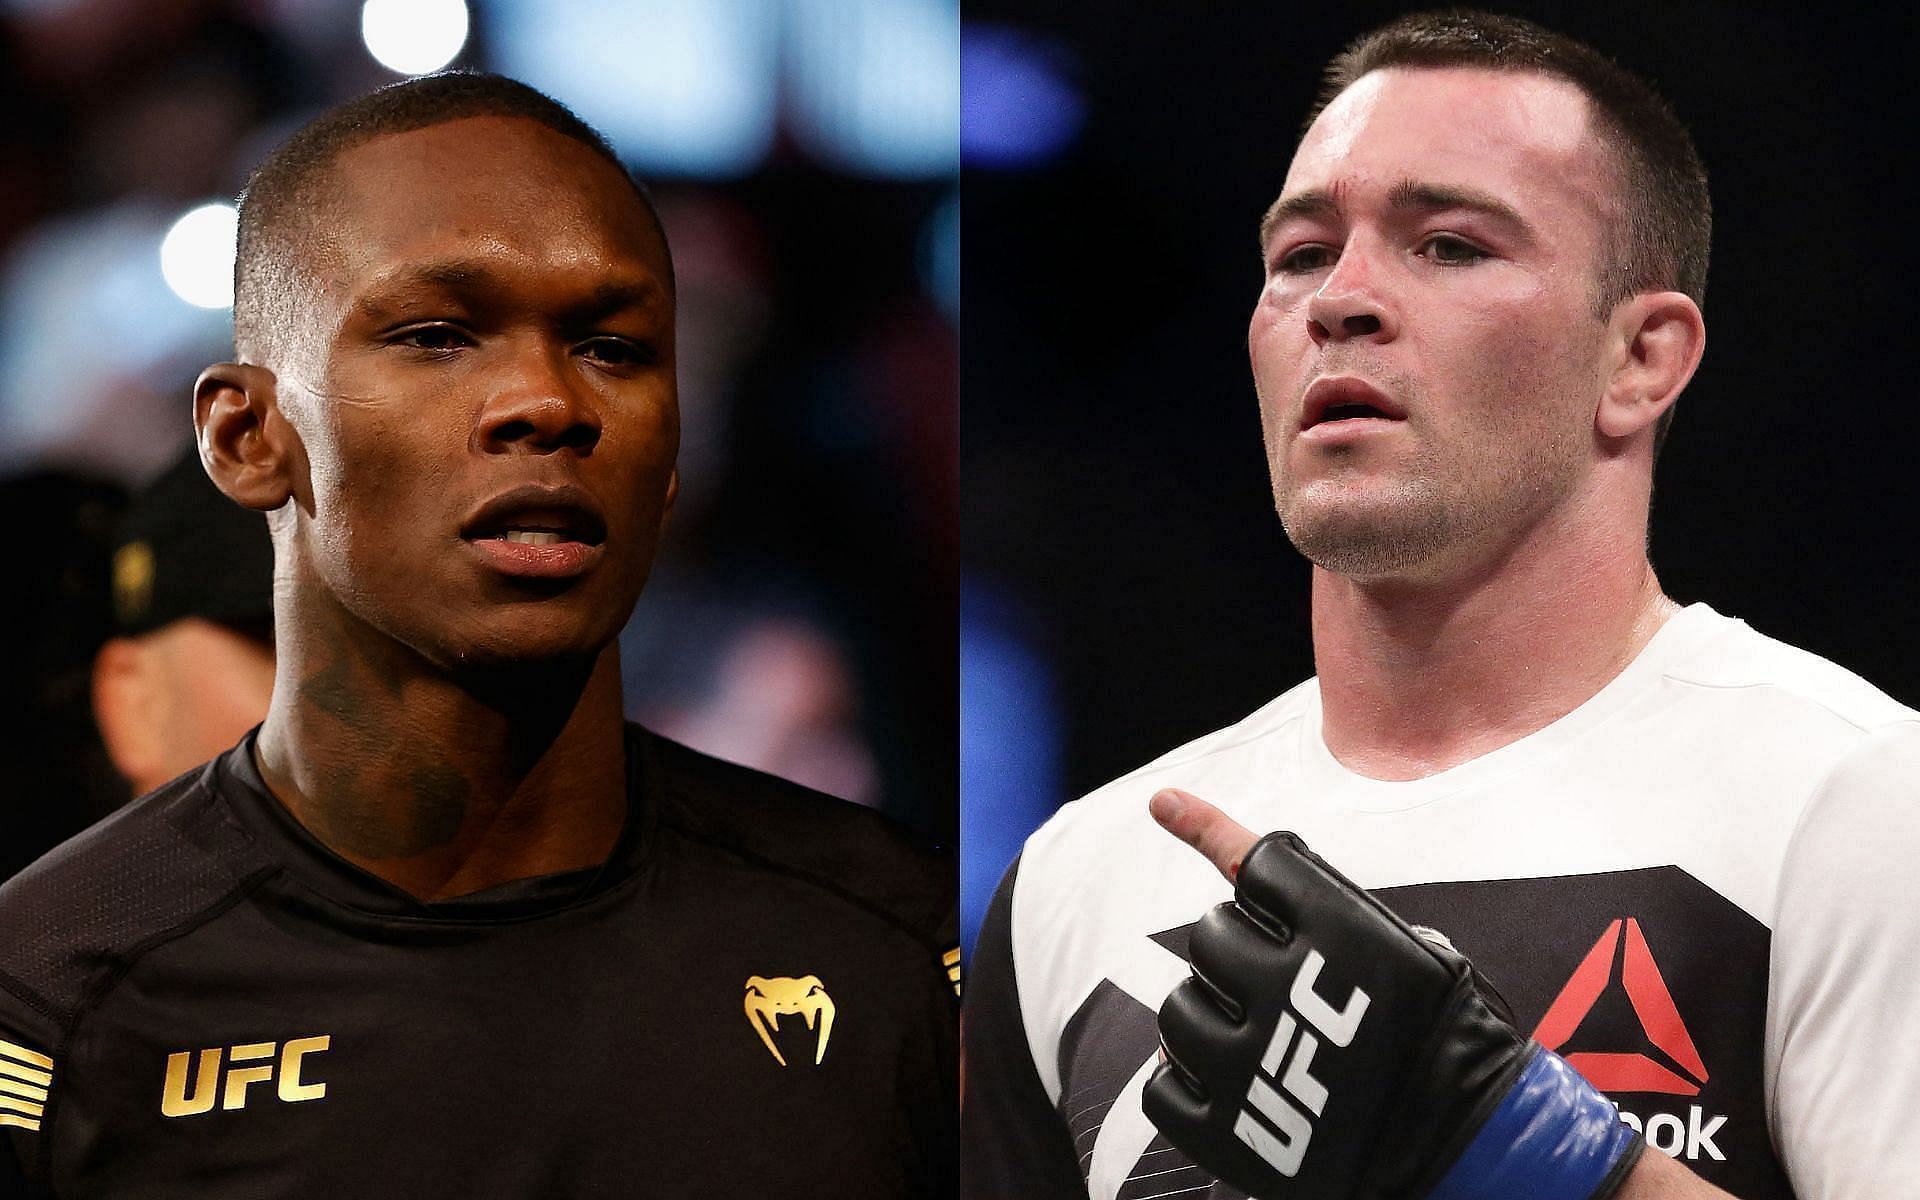 Israel Adesanya (left) and Colby Covington (right)